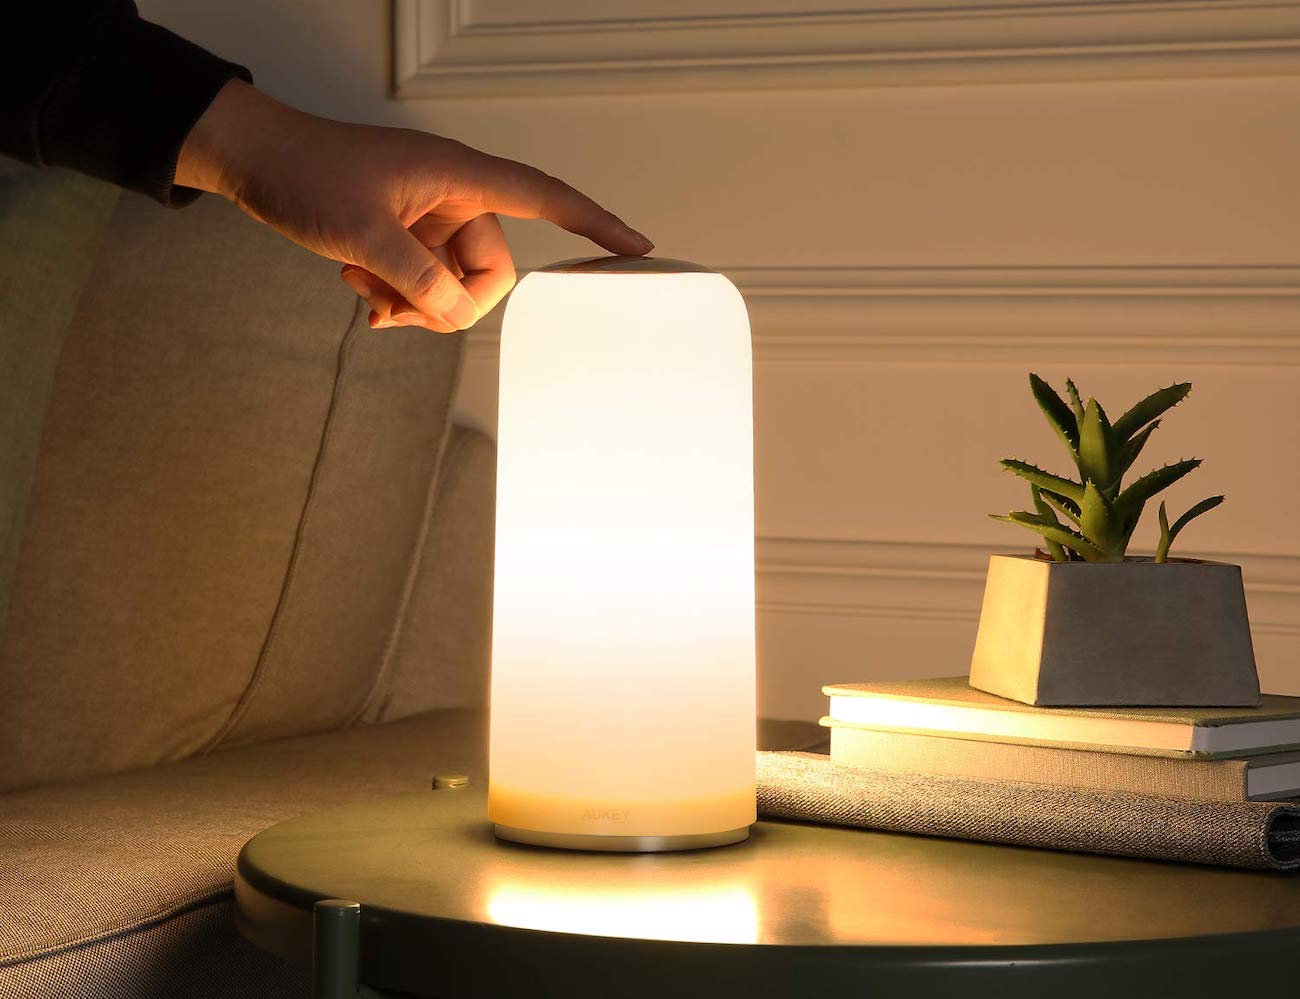 AUKEY Touch-Sensitive Table Lamp provides the perfect amount of light